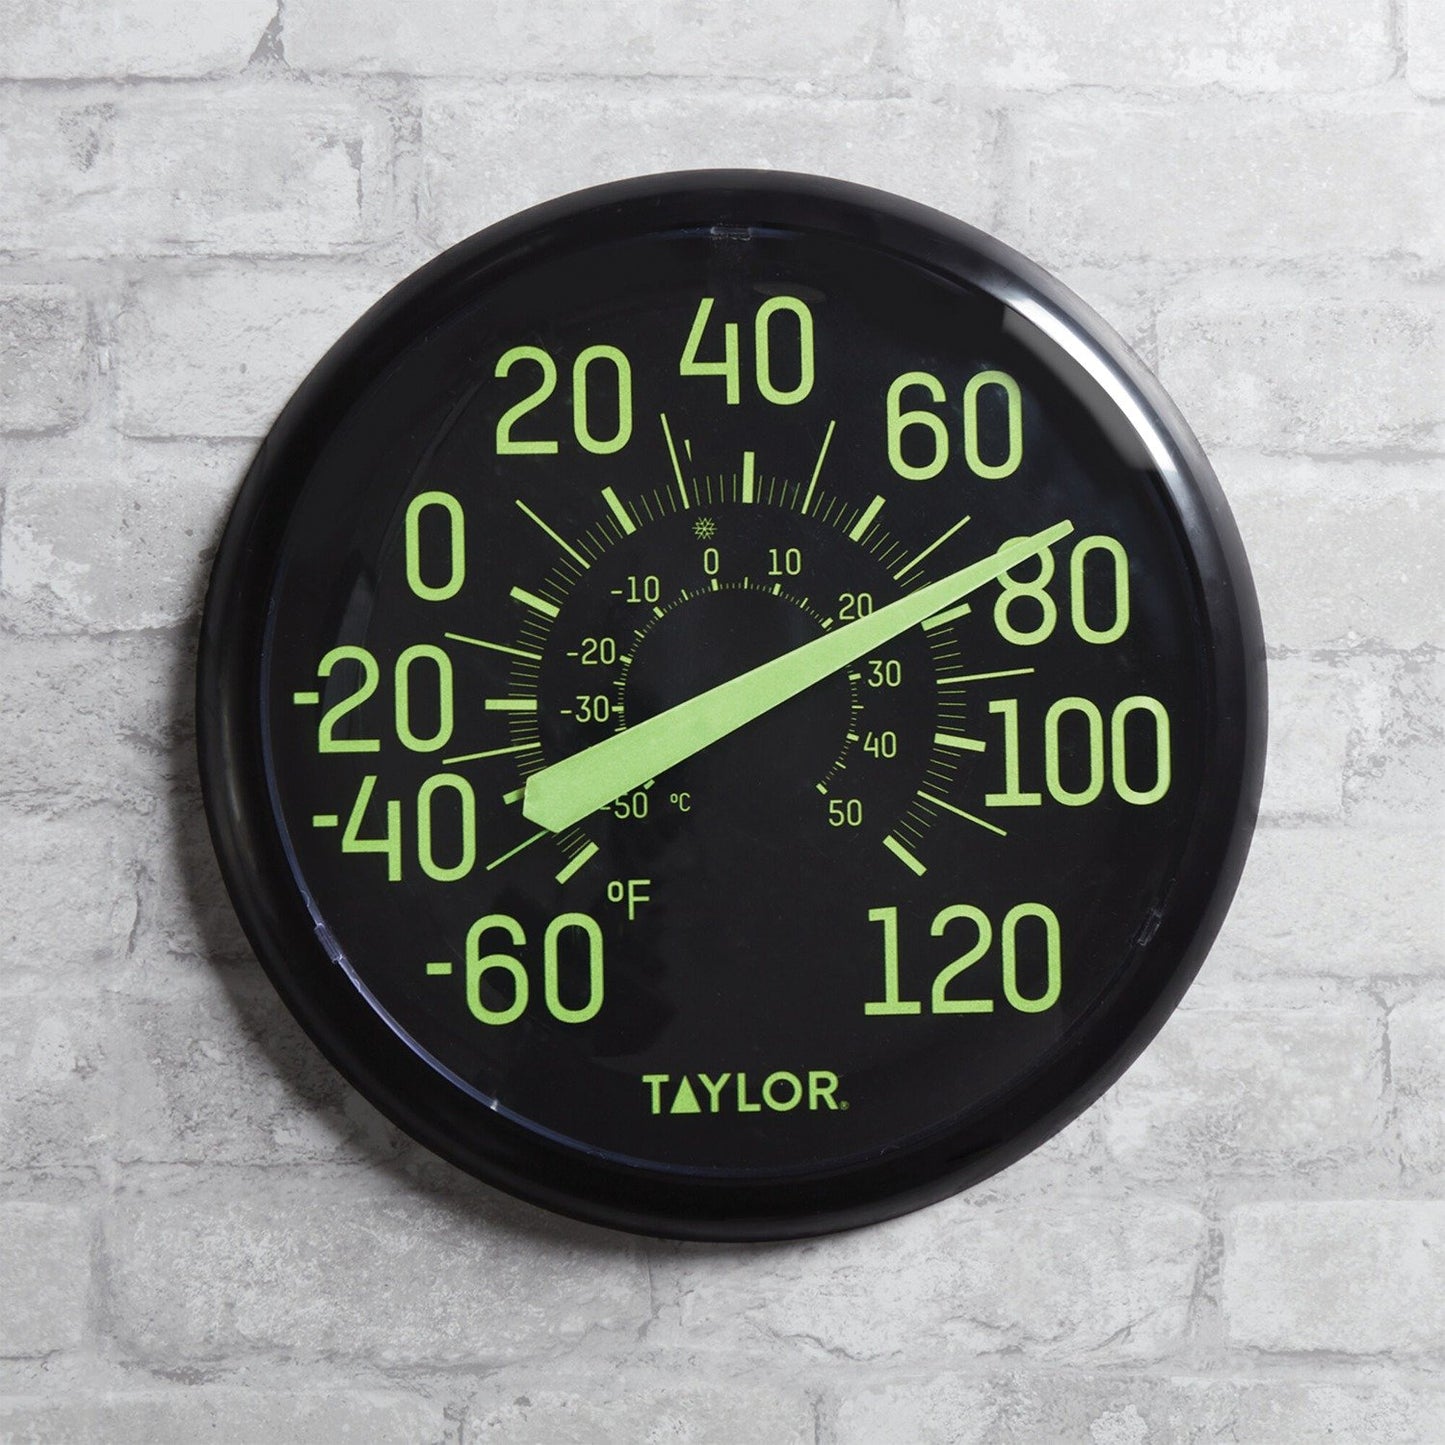 Taylor Precision Products 5267459 13.25" Indoor/Outdoor Glow Thermometer